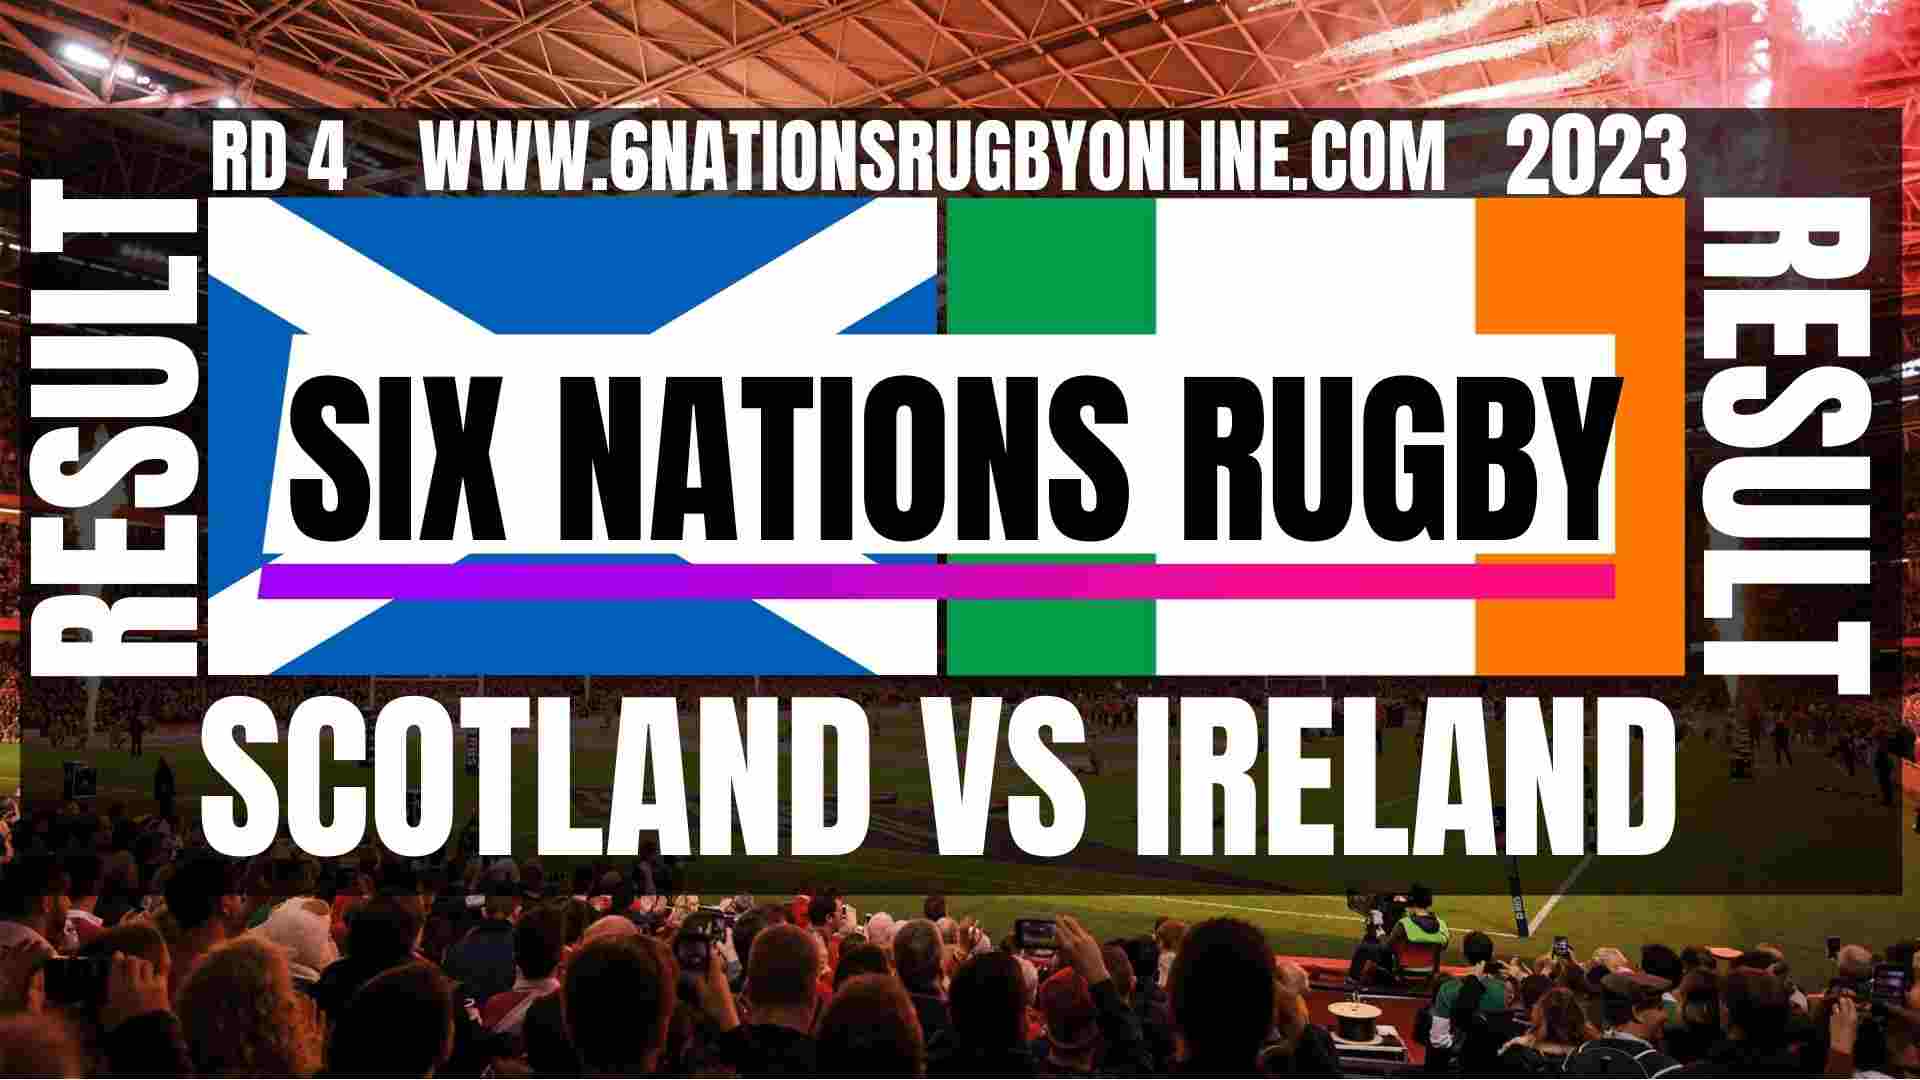 Scotland vs Ireland RD 4 Result 2023 | Six Nations Rugby